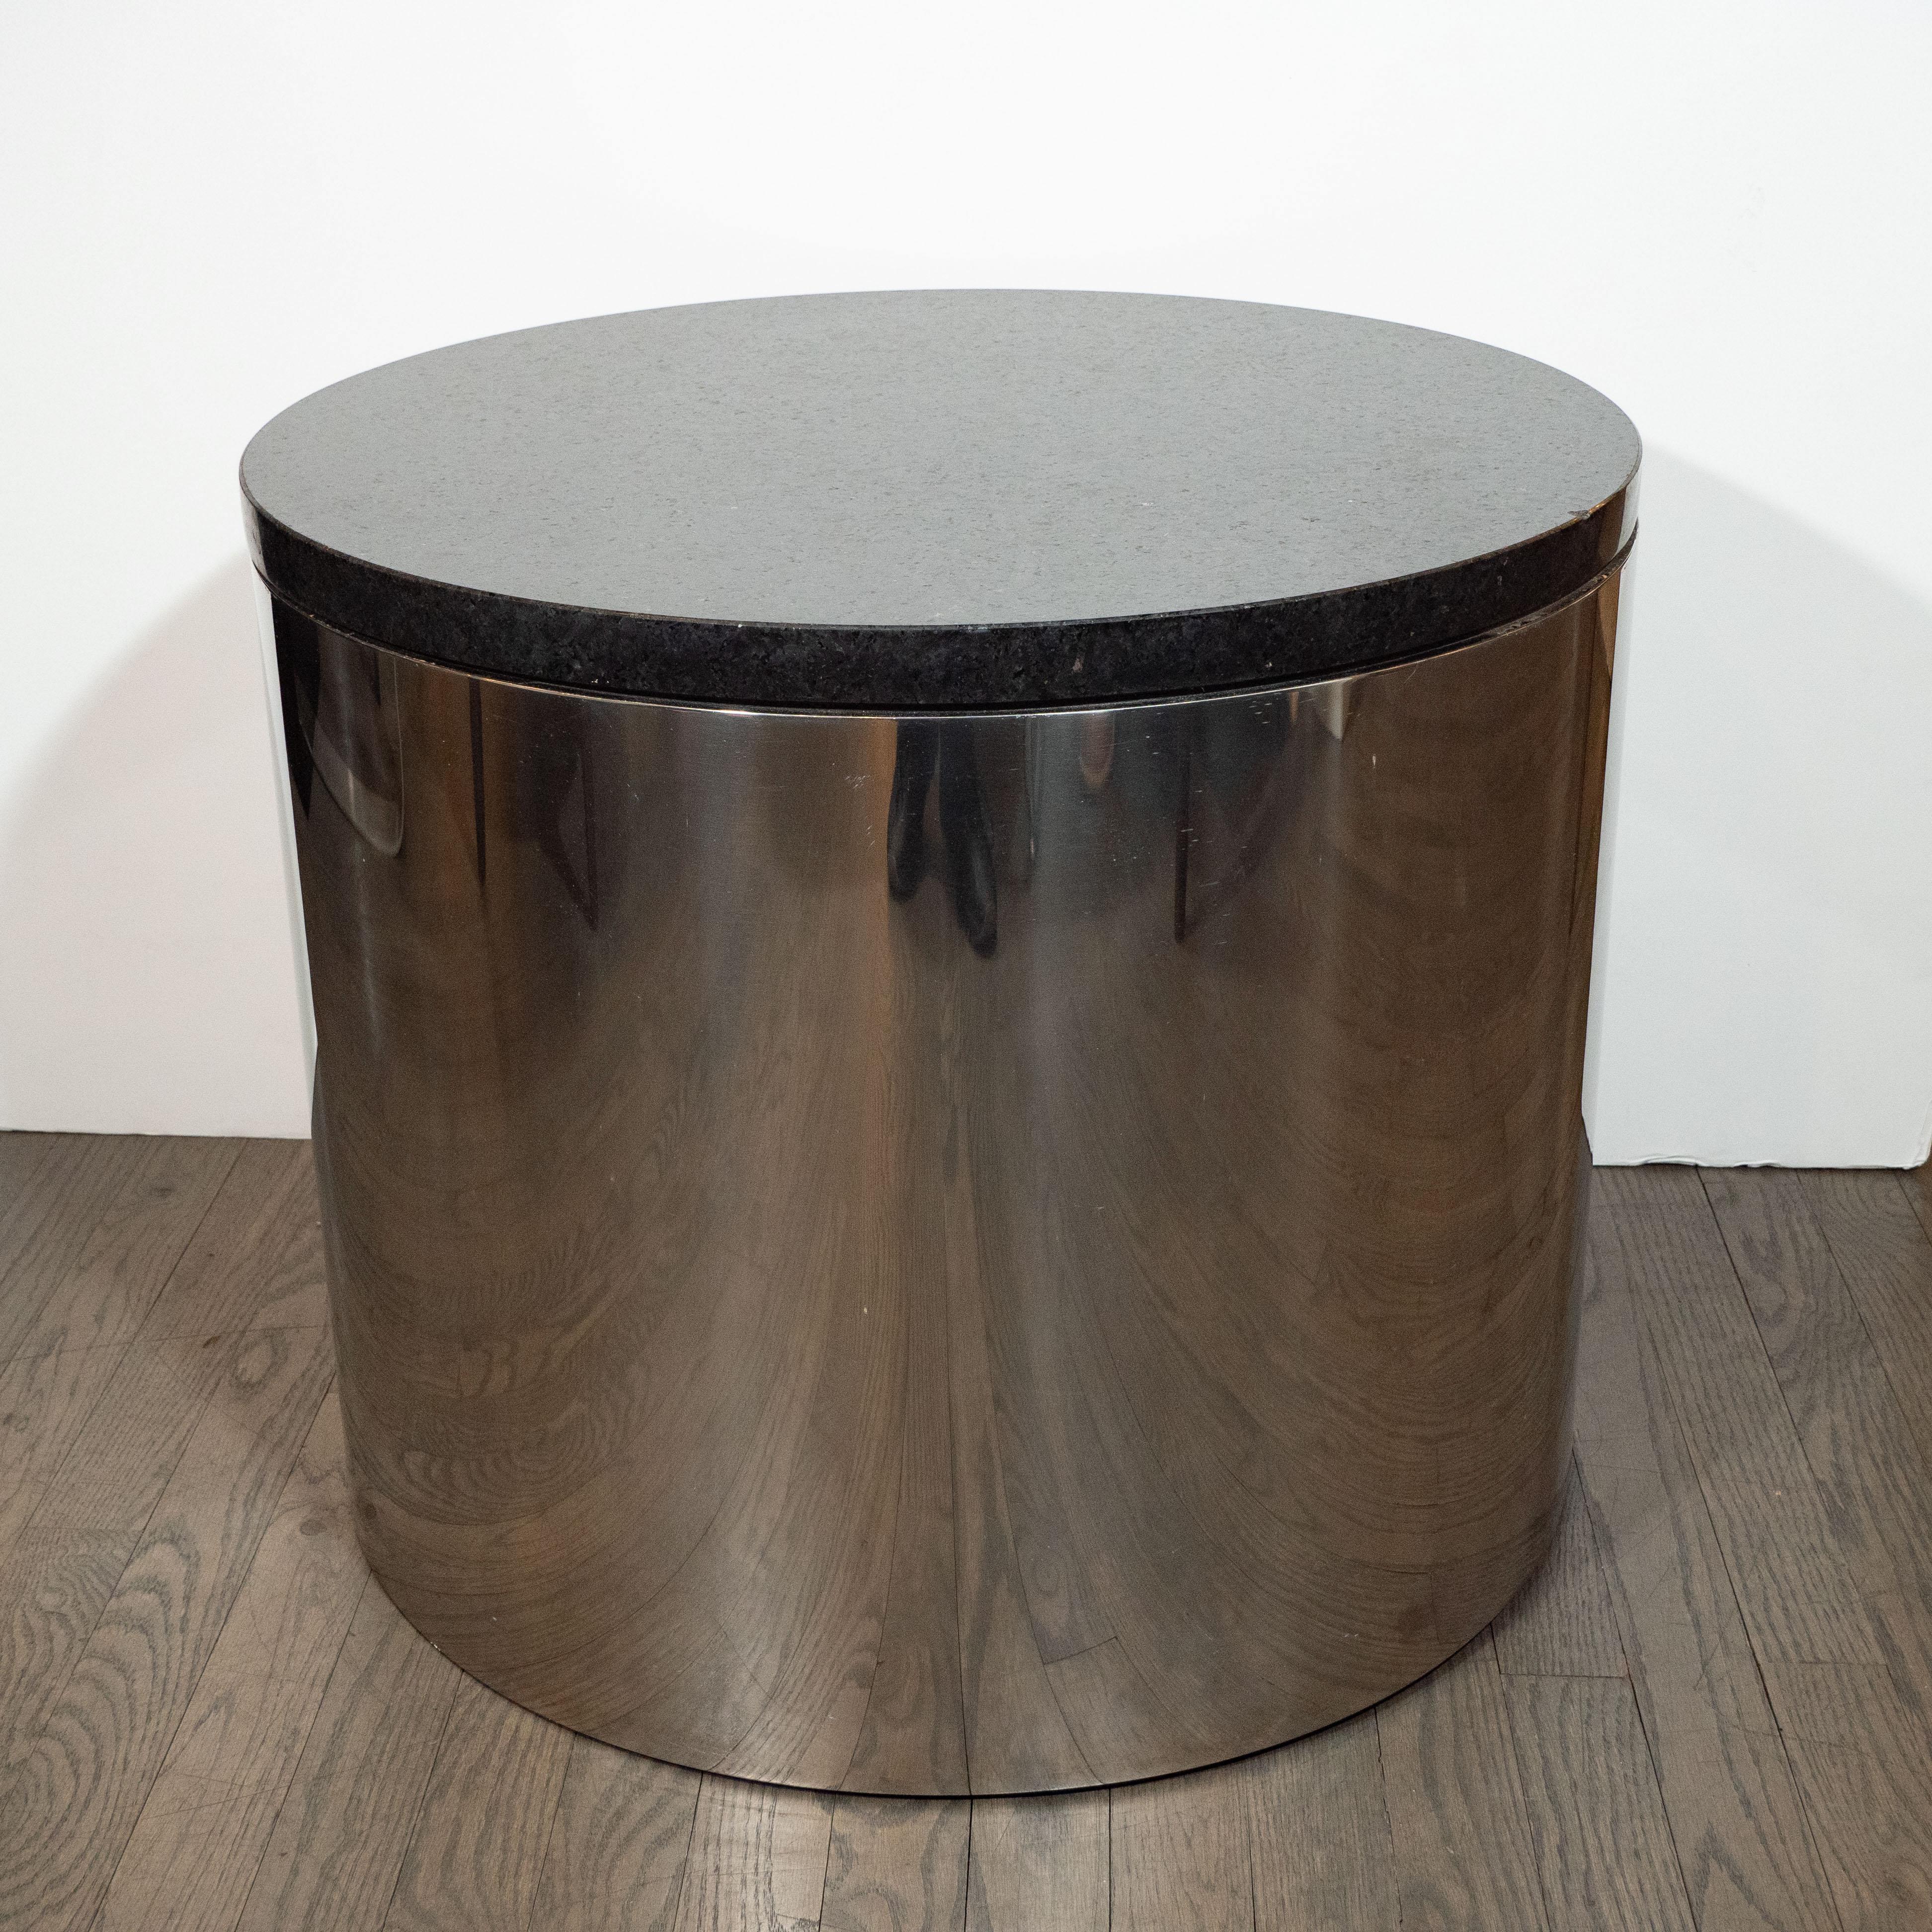 This refined occasional table was realized in the United States, circa 1970. It features a cylindrical body created from lustrous chrome with a circular granite top. The piece is a study in the simple beauty of excellent design- minimal,